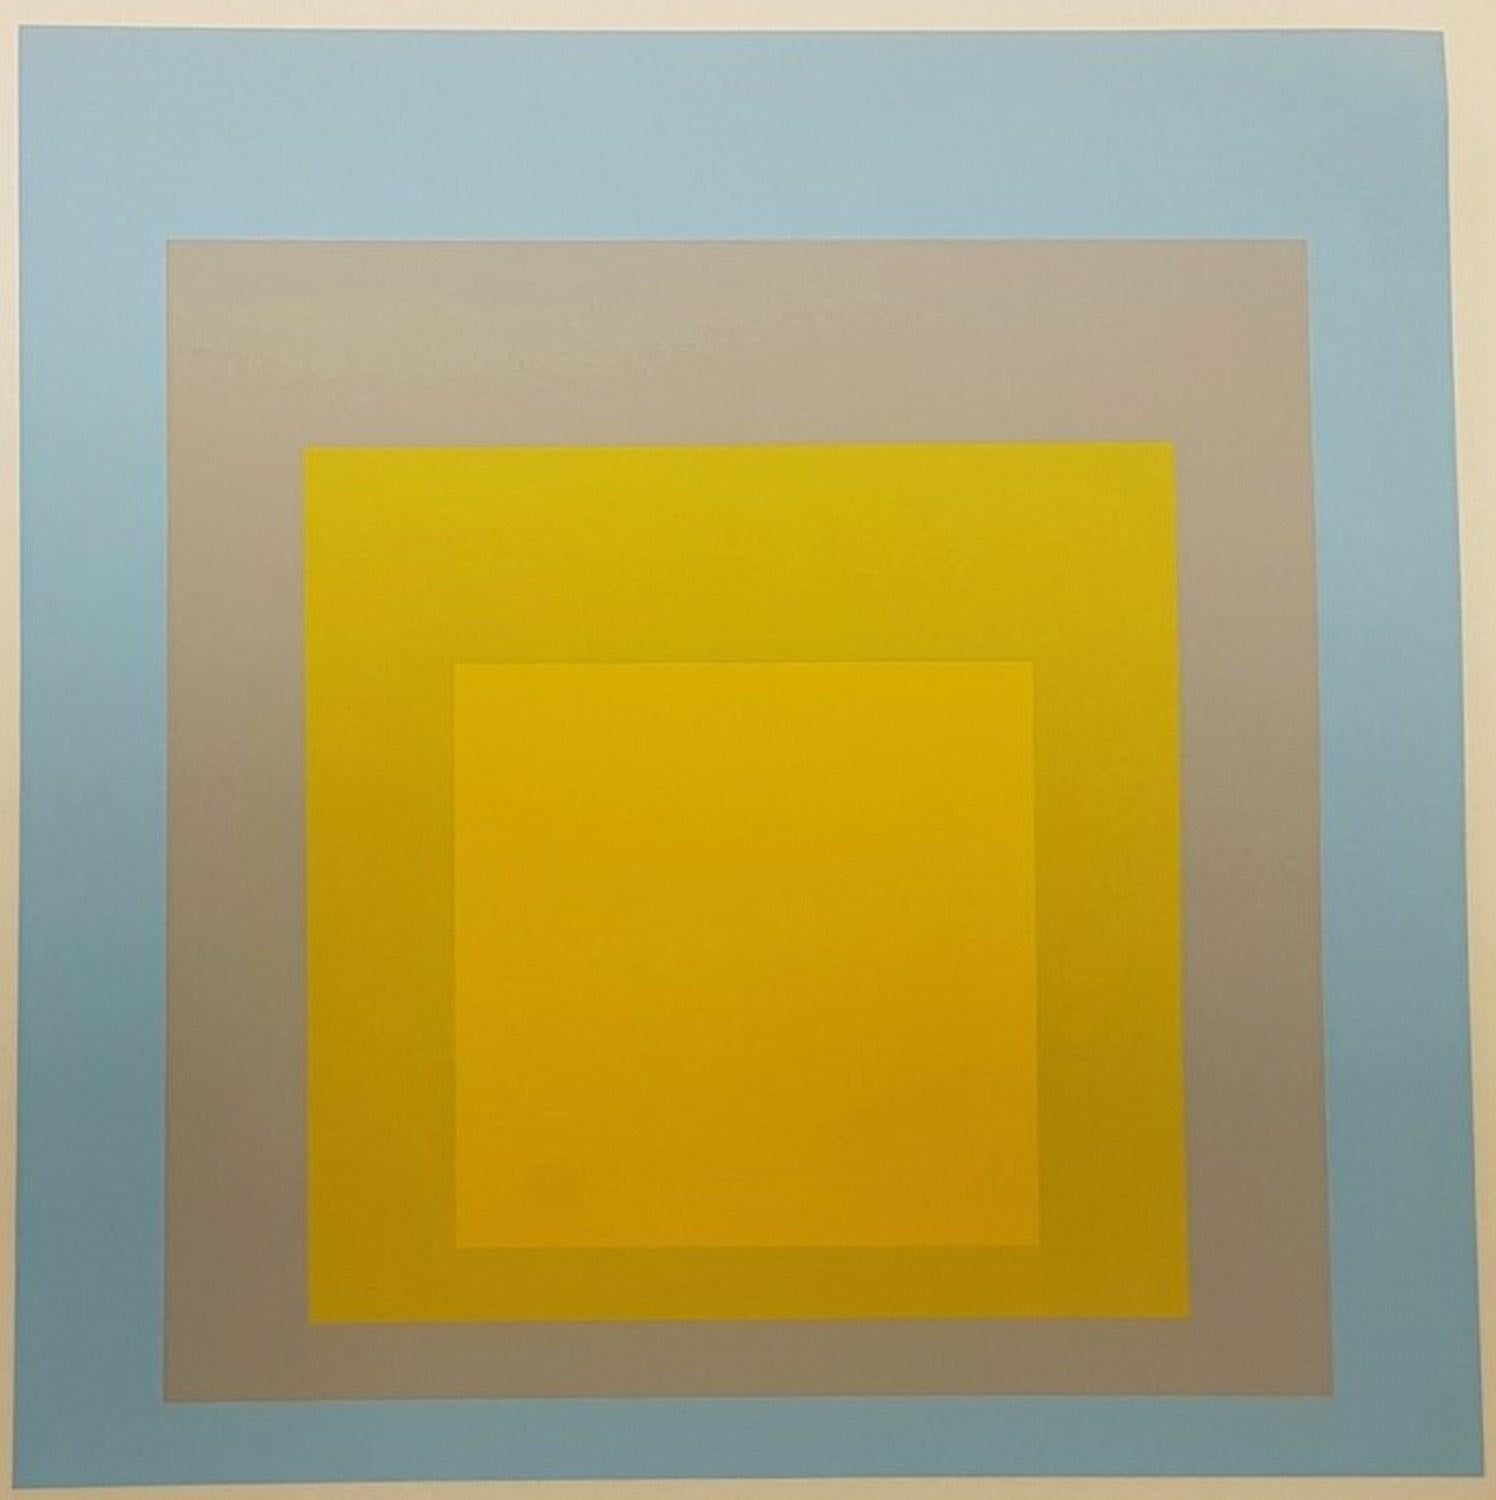 (after) Josef Albers Abstract Print - Hommage au Carre (Homage to the Square)